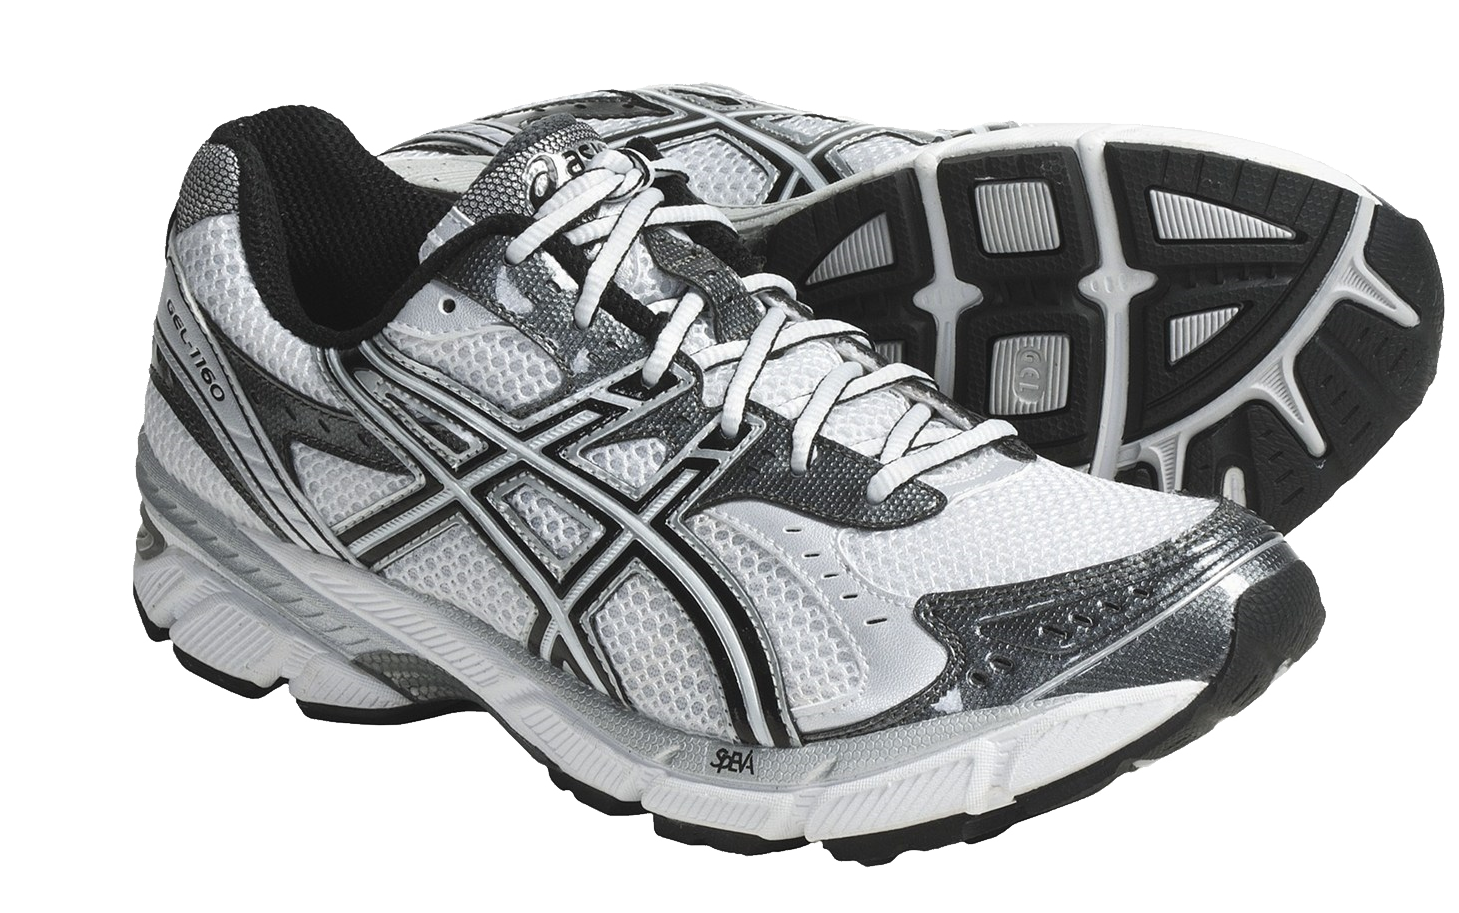 Running Shoes Png - Running Shoes Png Image, Transparent background PNG HD thumbnail